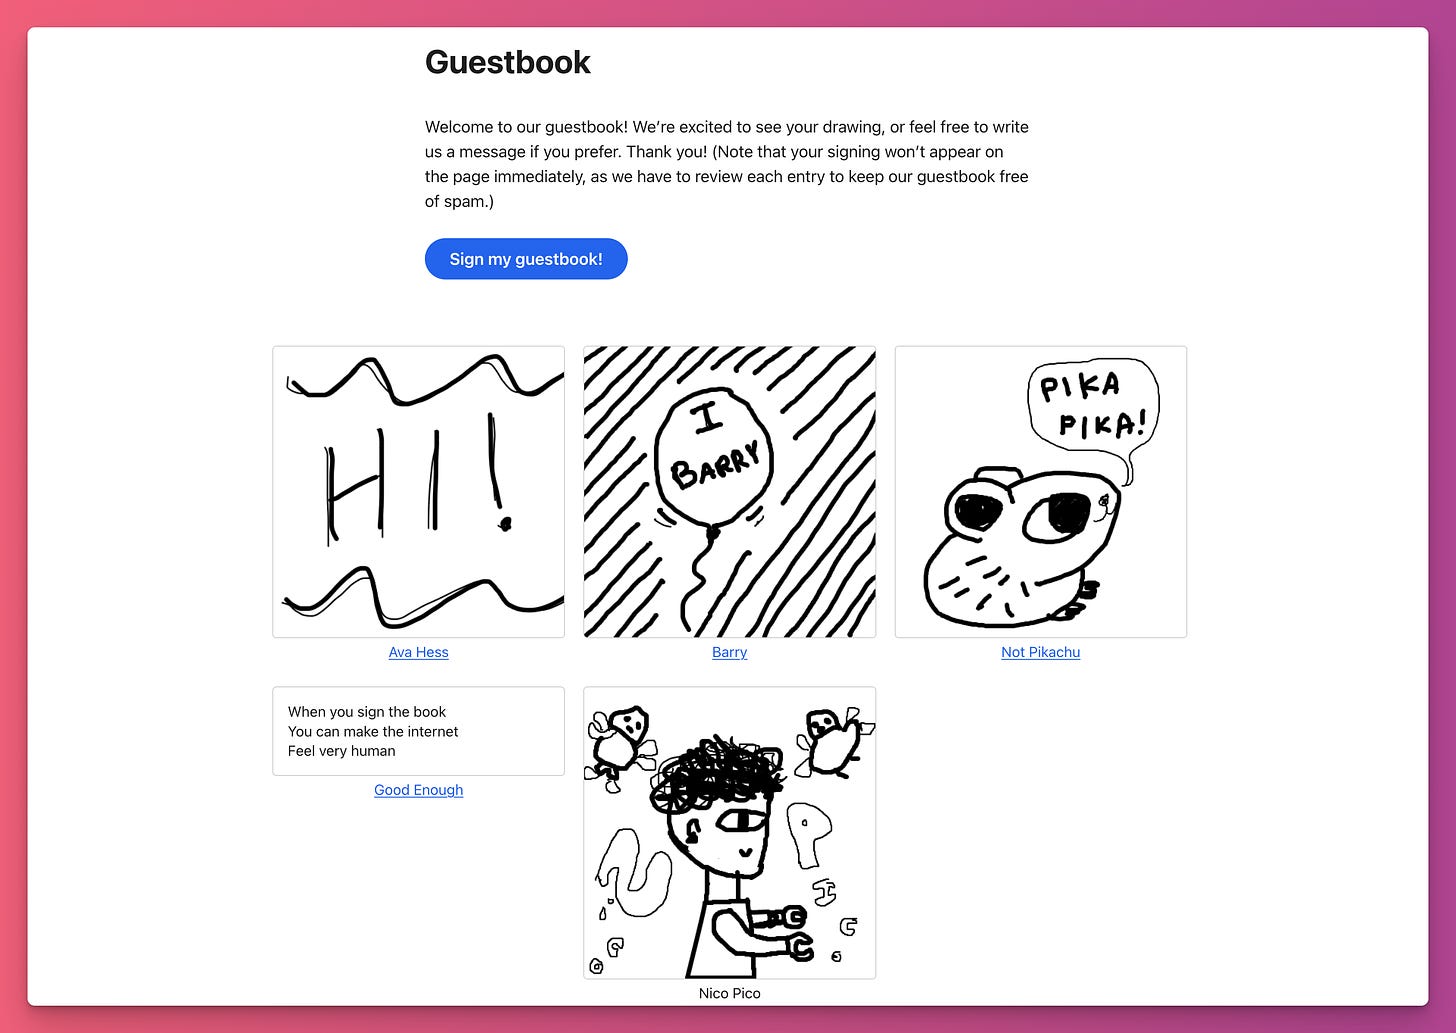 A screenshot of the new Pika Guestbook. There is a "sign my guestbook" button as well as several pictures of guestbook drawings, as well as one written guestbook entry